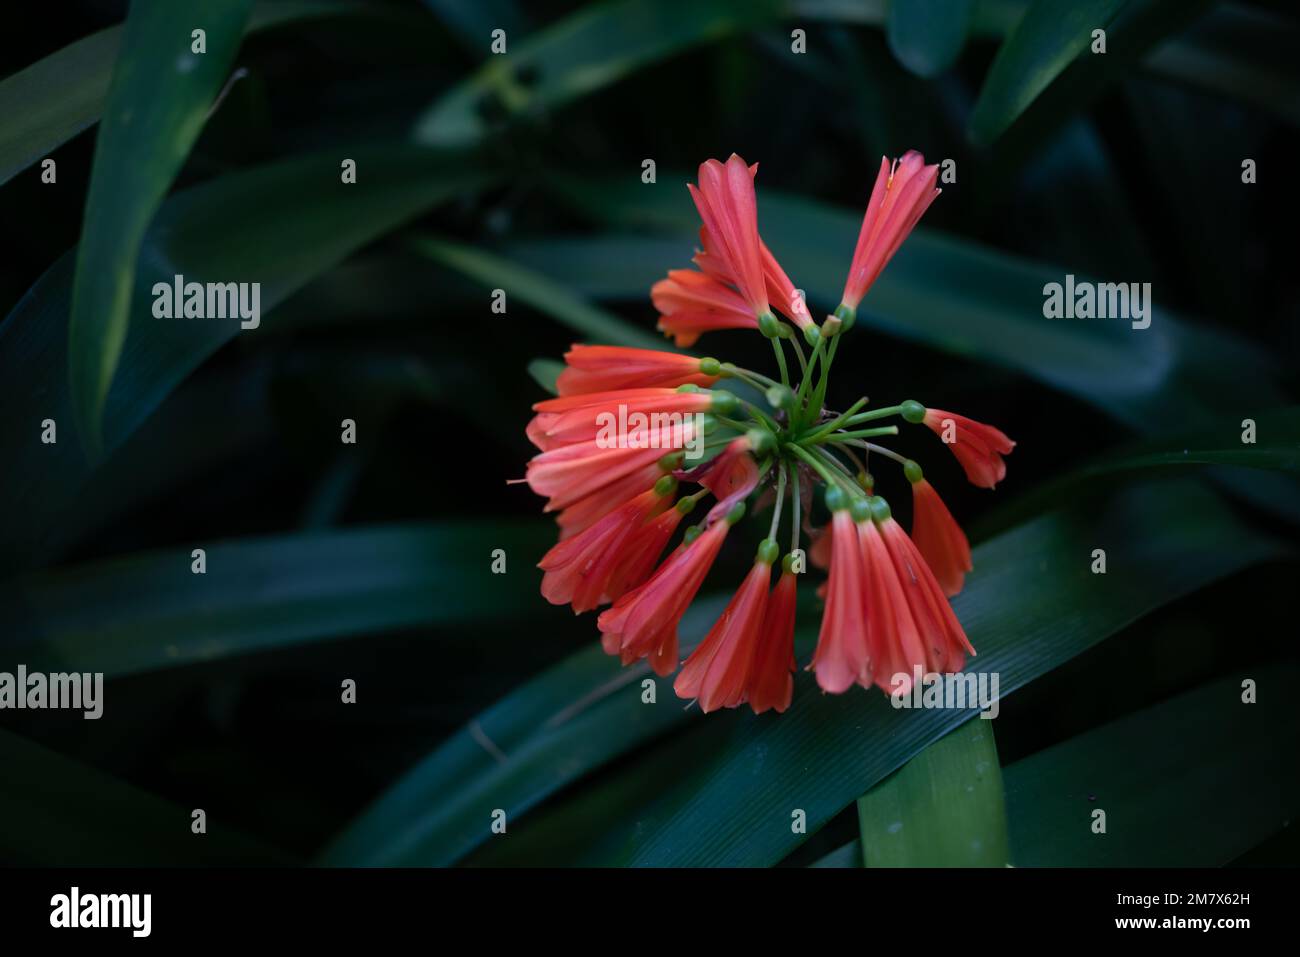 Orange flowers of green-tip forest lily or Clivia nobilis Stock Photo